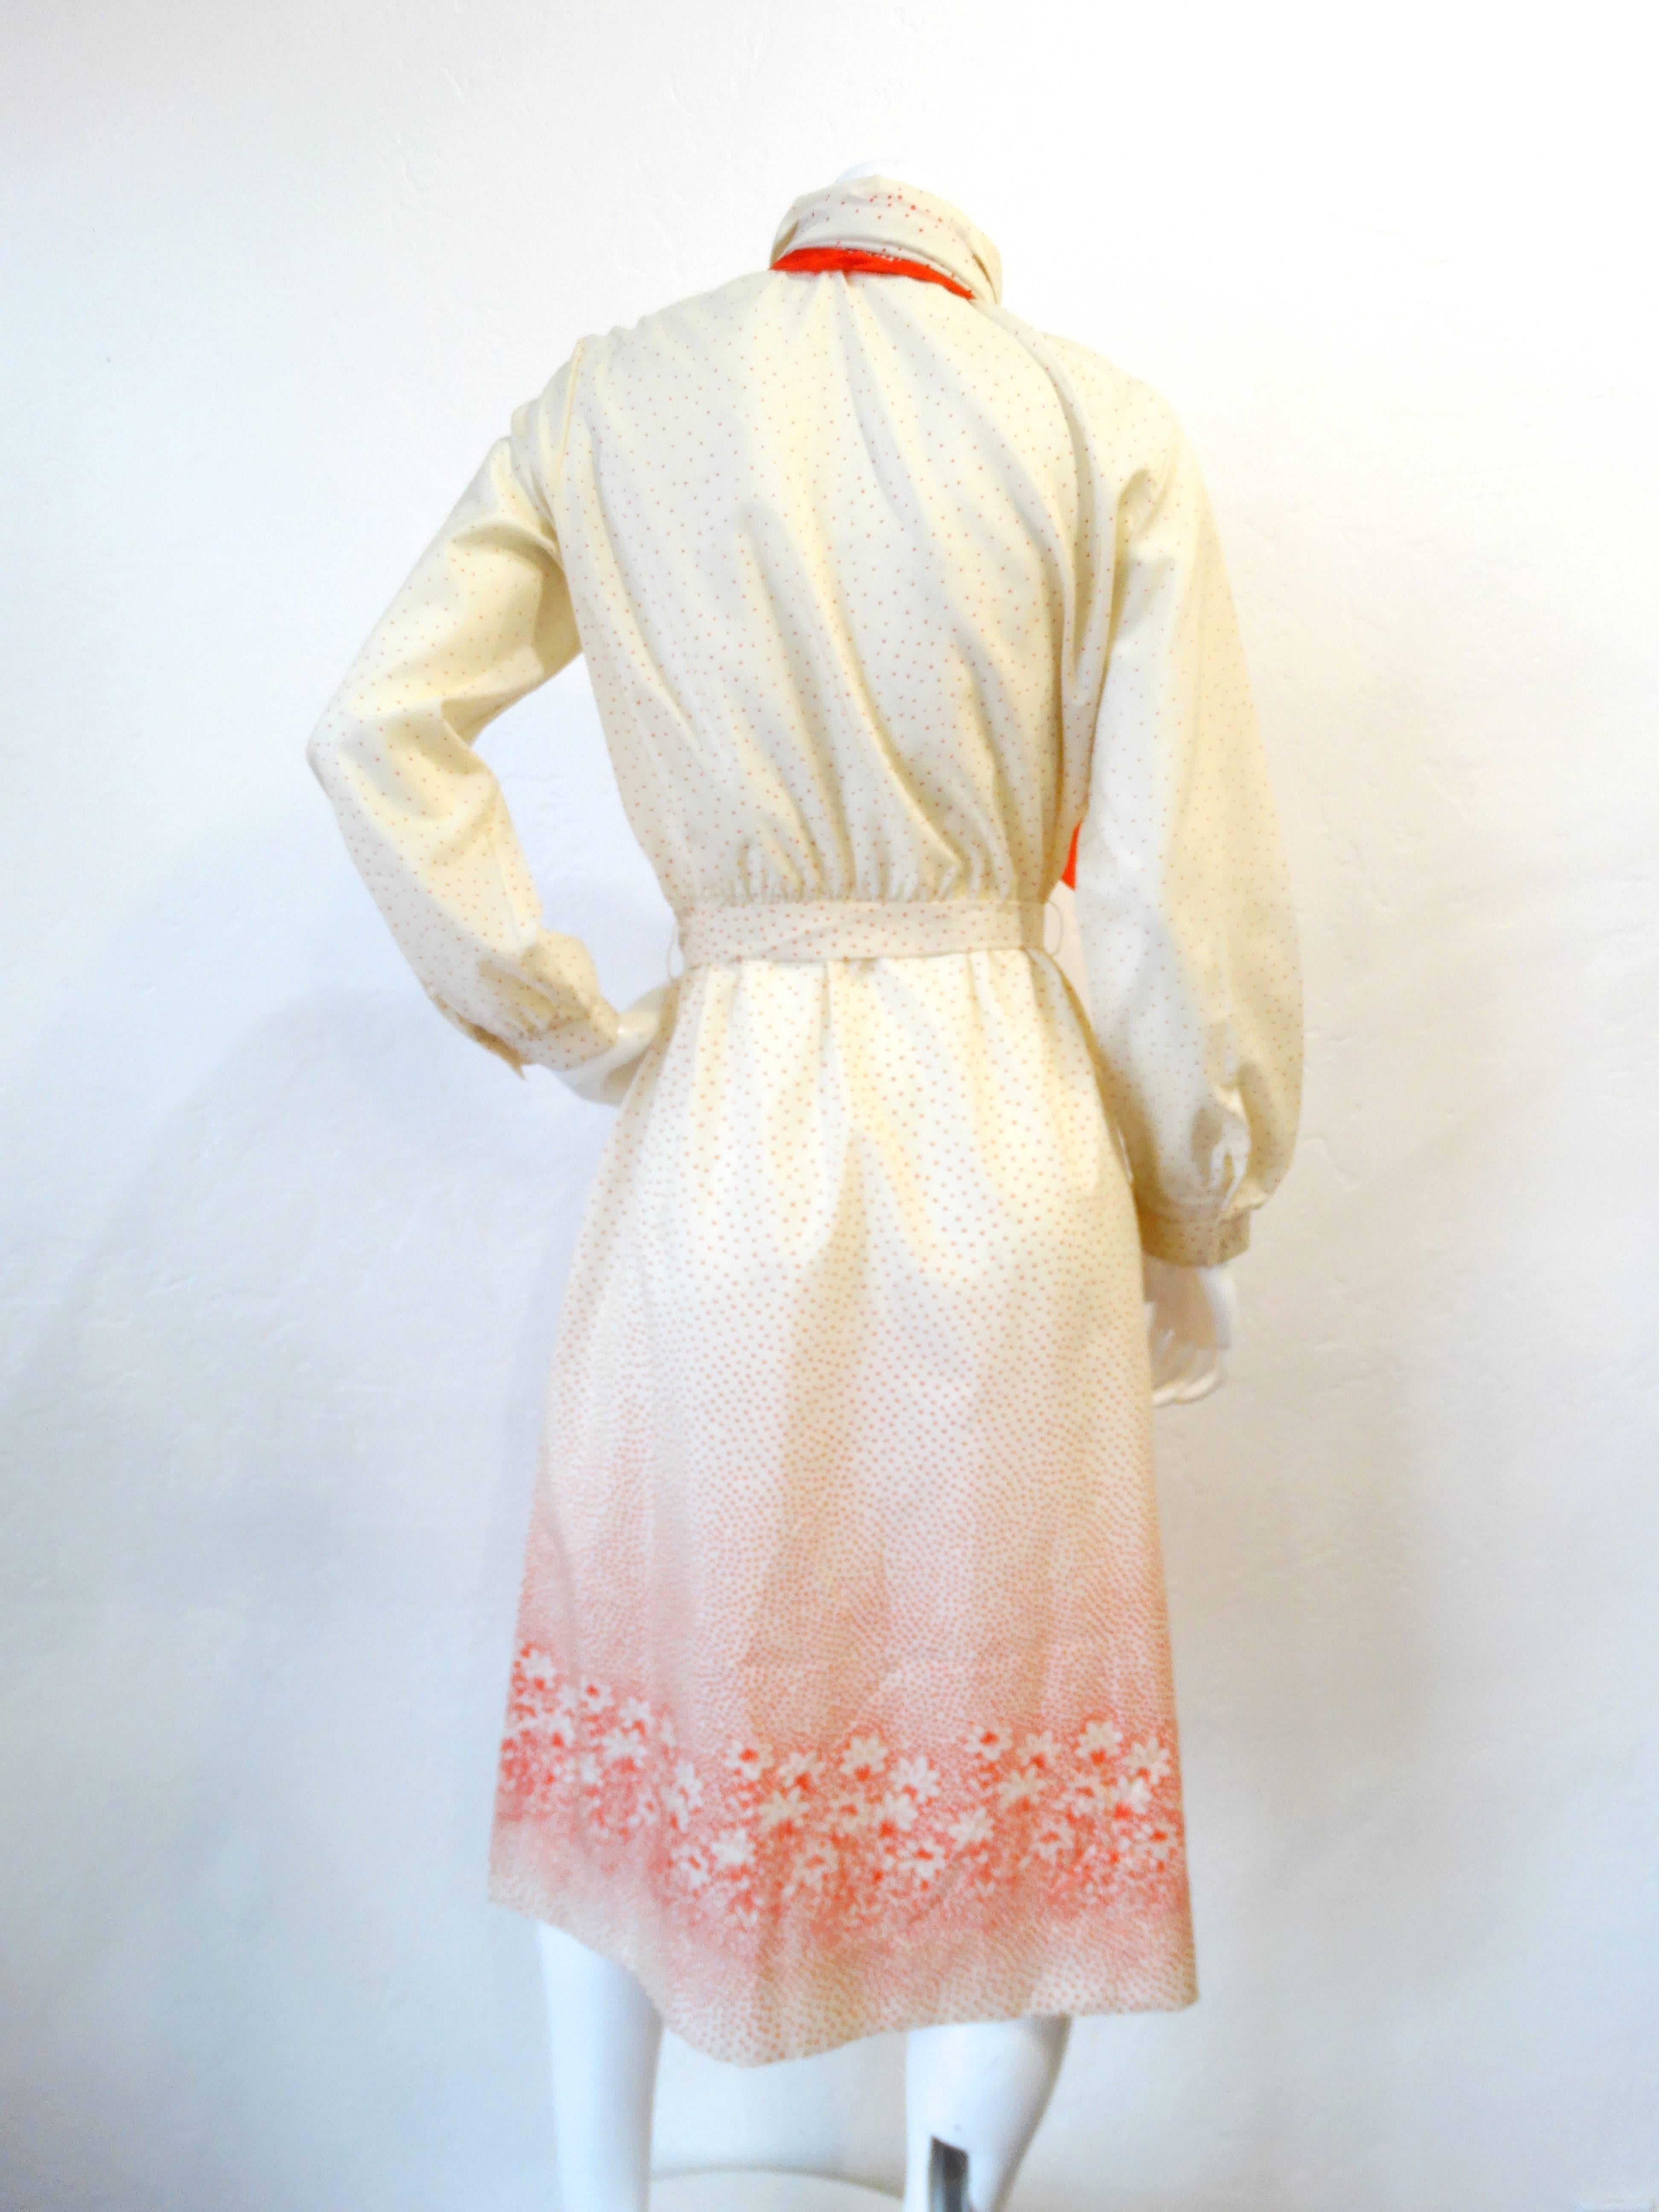 Women's 1960s Lanvin Cream & Red Polkadot Floral Dress For Sale